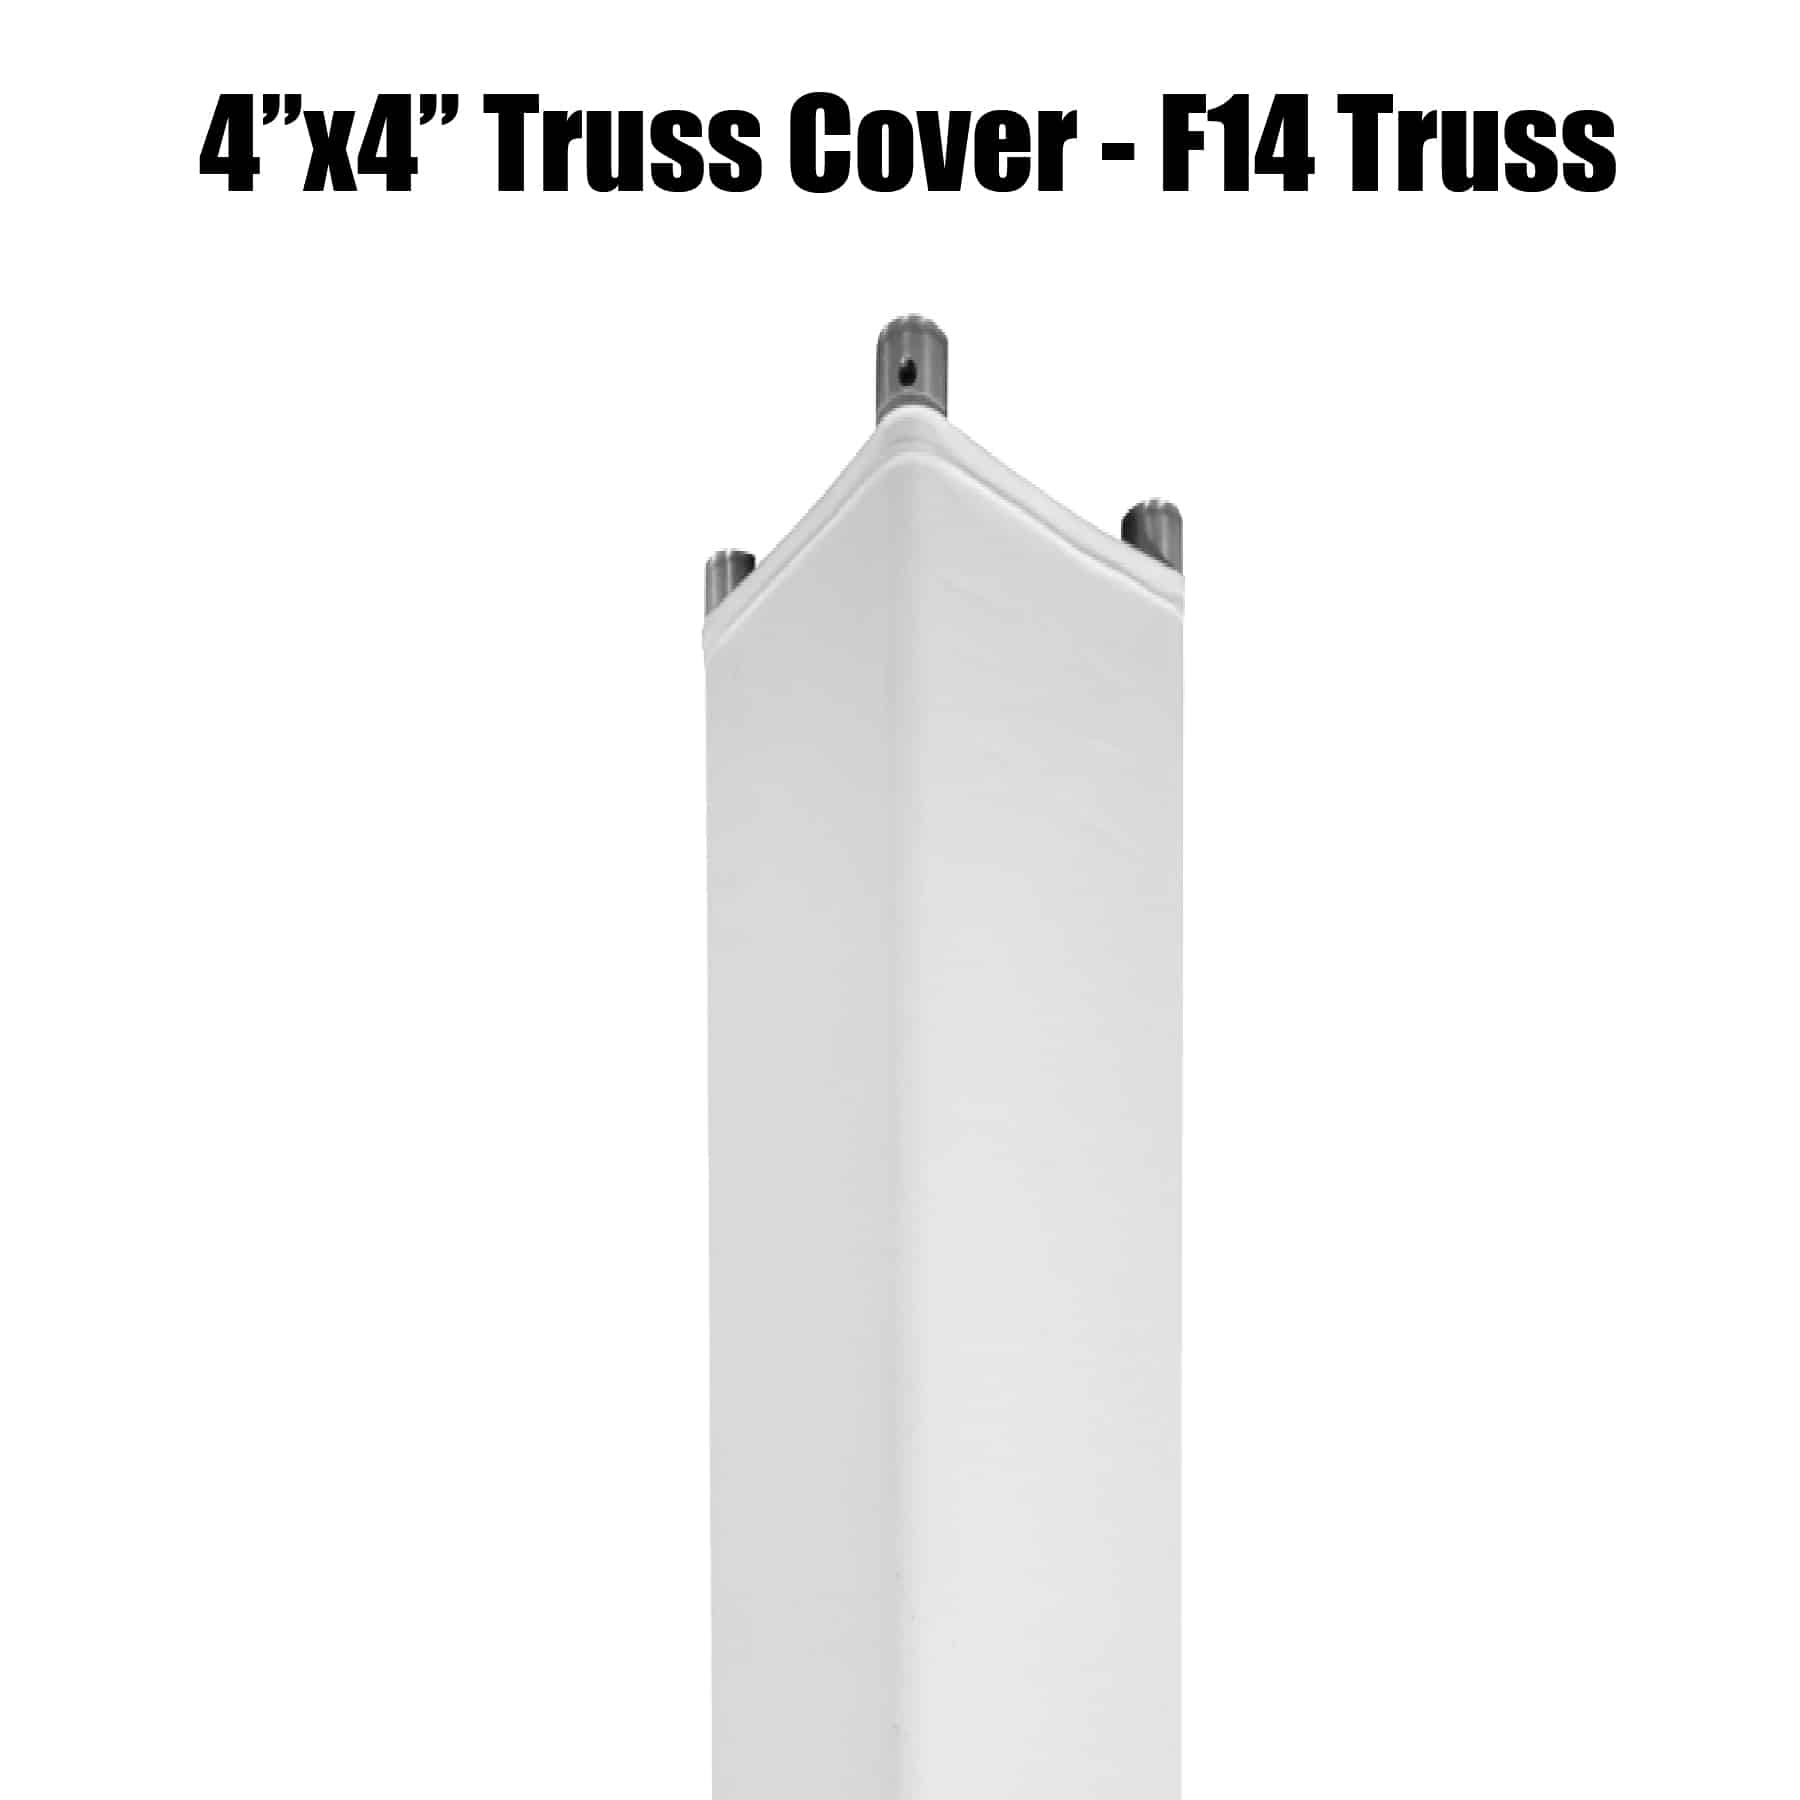 F14 Truss Covers - Pull Over 4"x4" - StretchyScreens